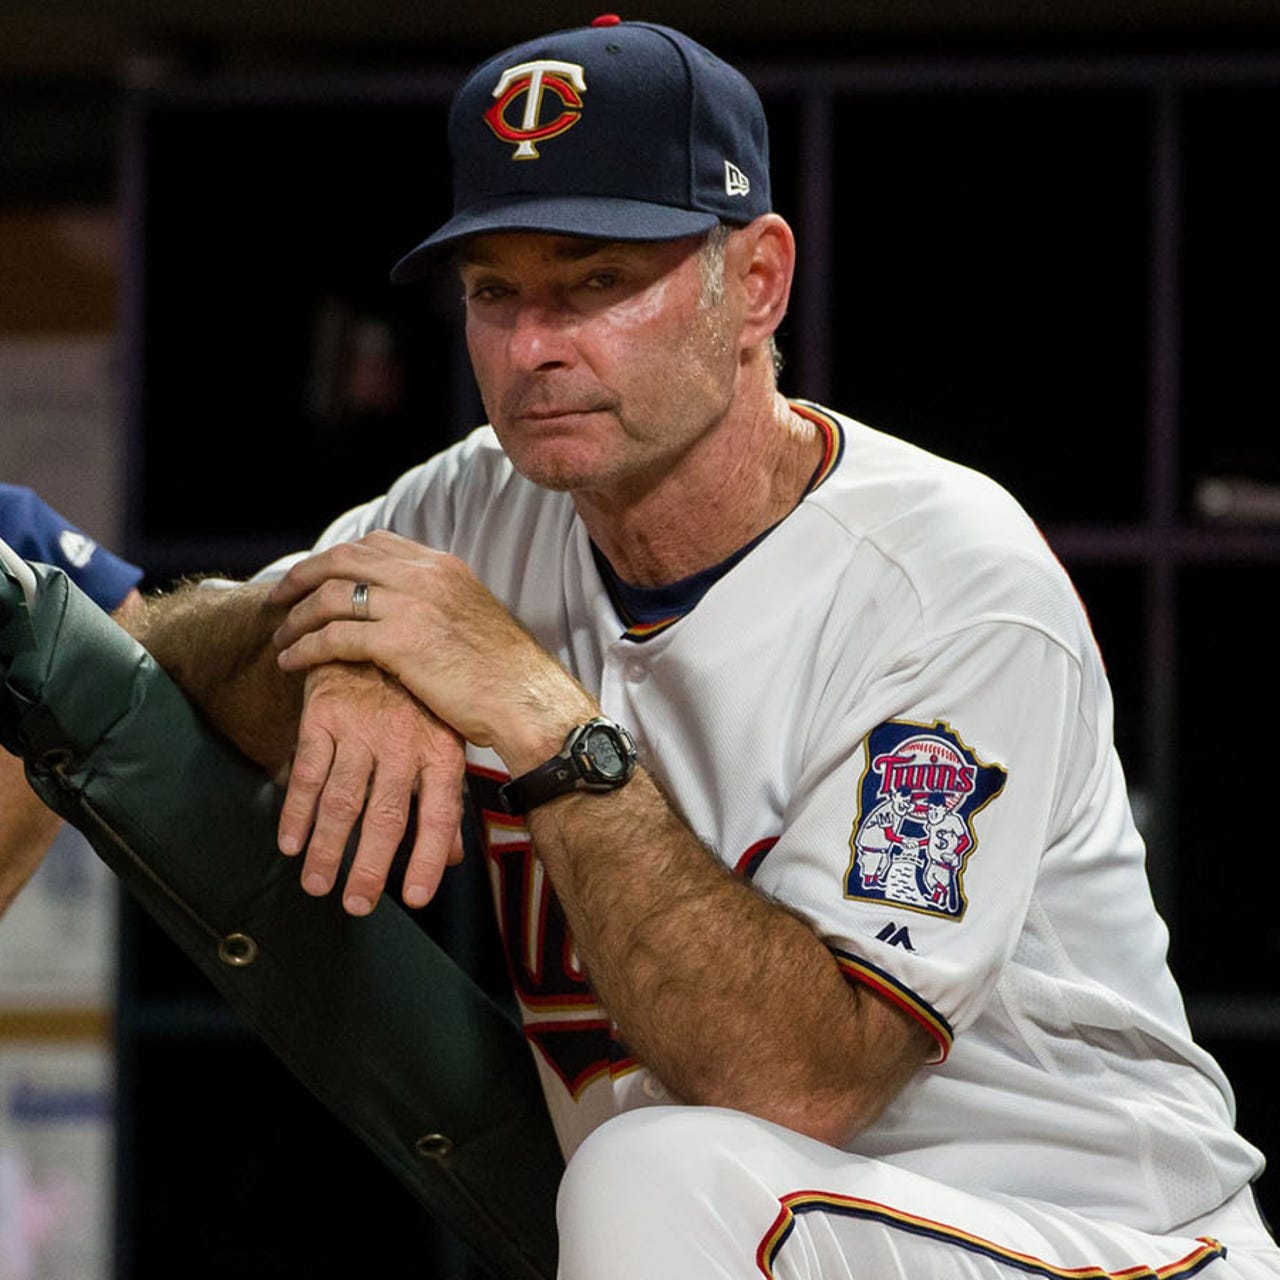 Twins' Molitor named AL Manager of the Year